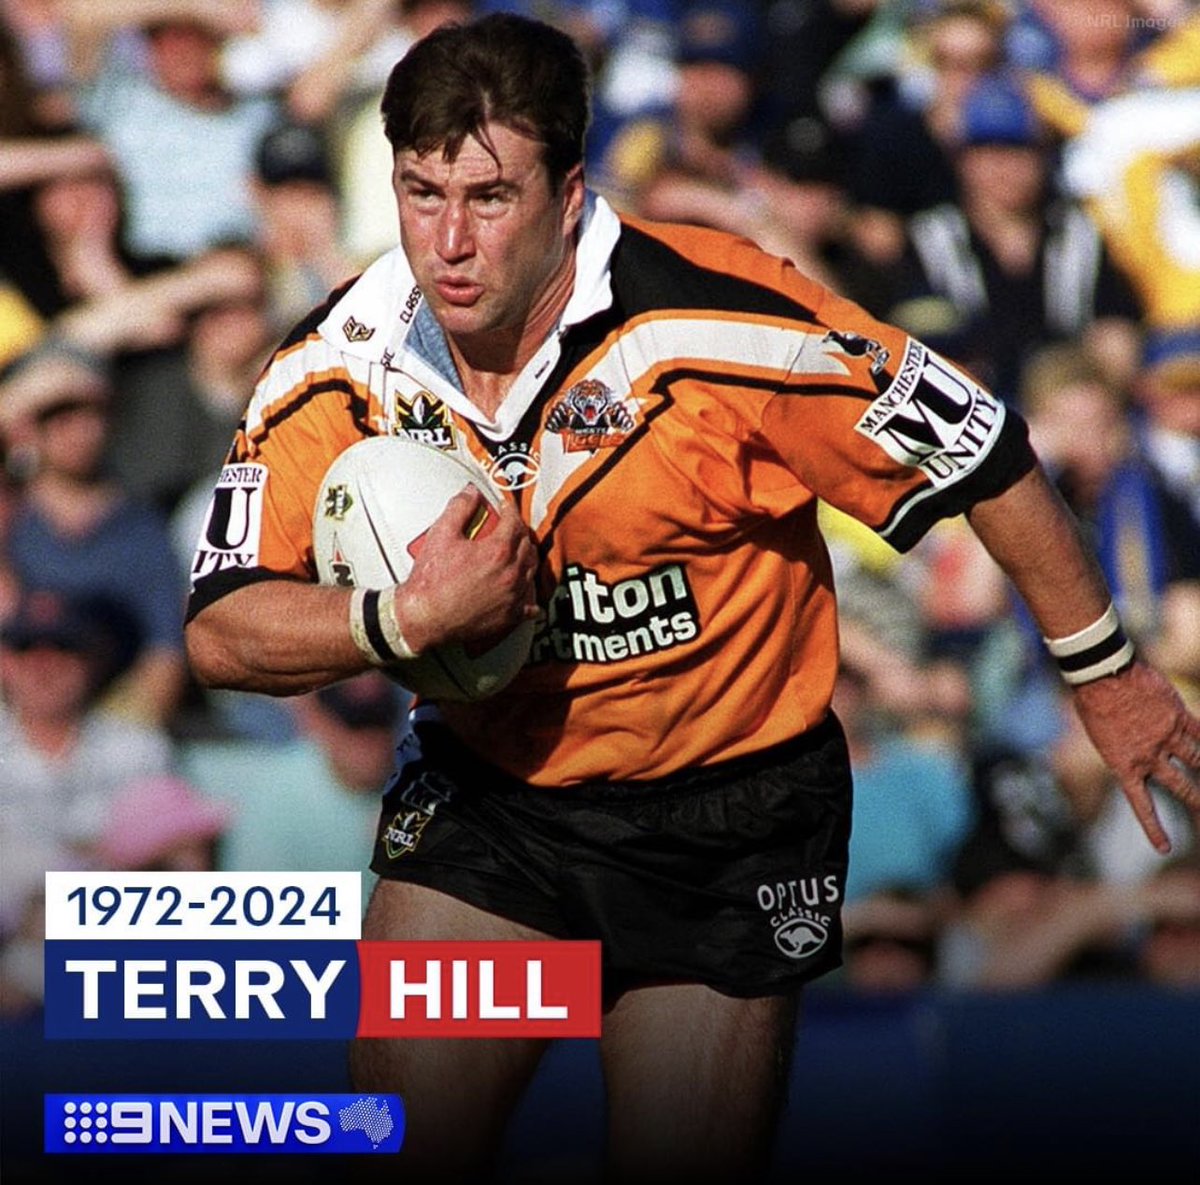 ⬜️⬜️⬜️⬜️⬜️⬜️⬜️⬜️

R.I.P TERRY HILL 

A GREAT FOOTBALLER 

& 

A FUNNY MAN 👨 

#NRL #FootyShow 

⬜️⬜️⬜️⬜️⬜️⬜️⬜️⬜️